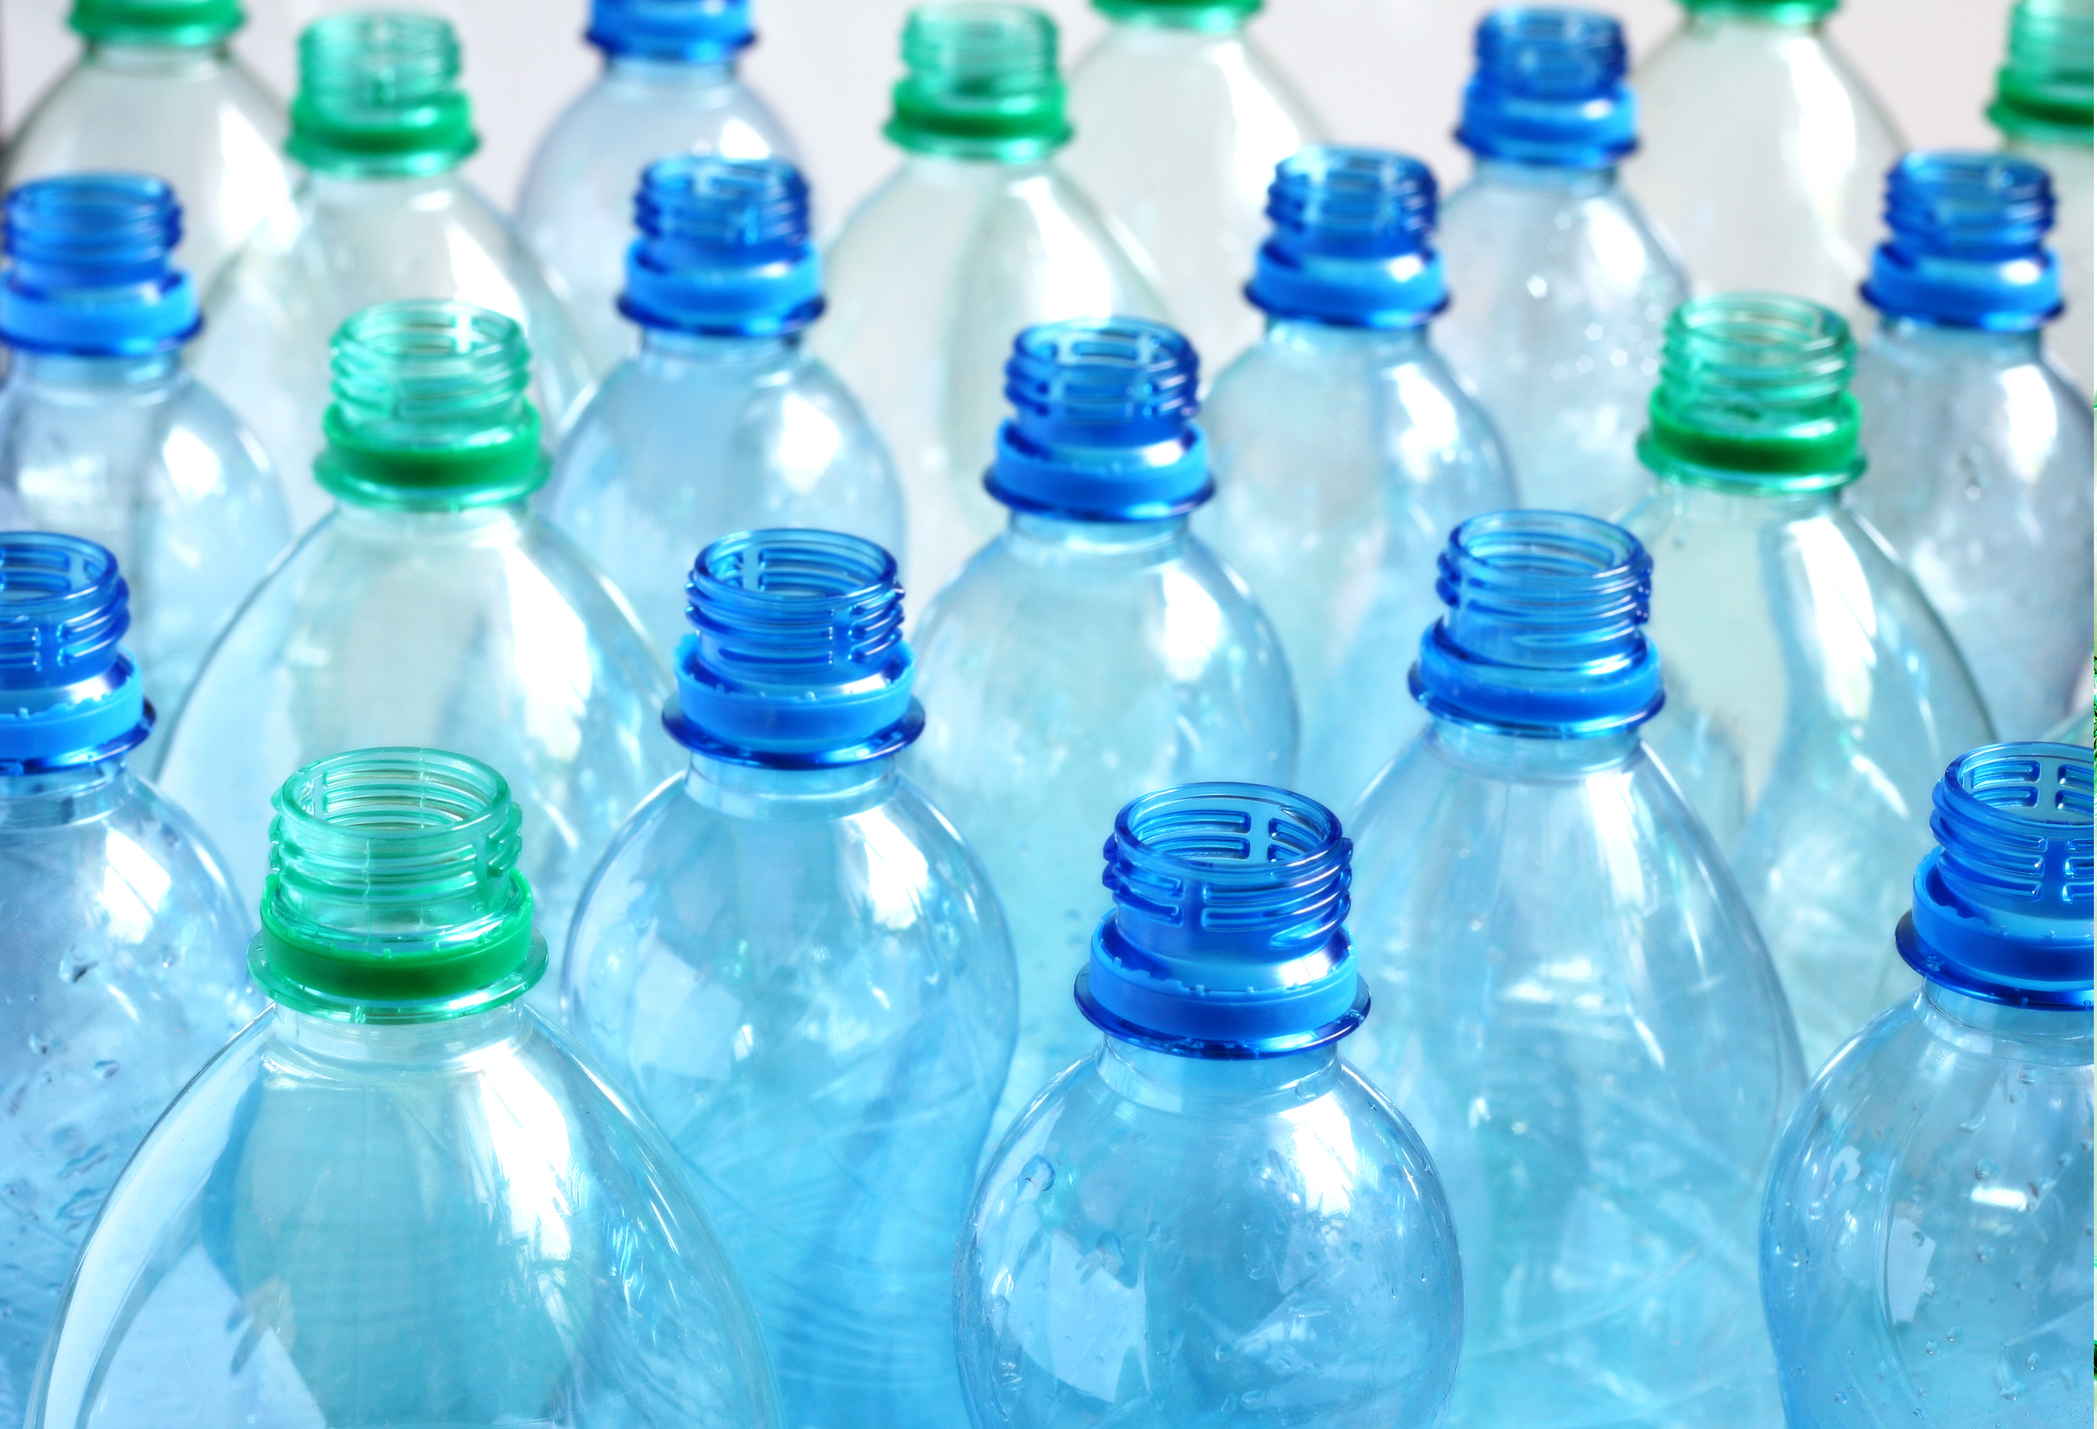 Empty plastic bottles being recycled